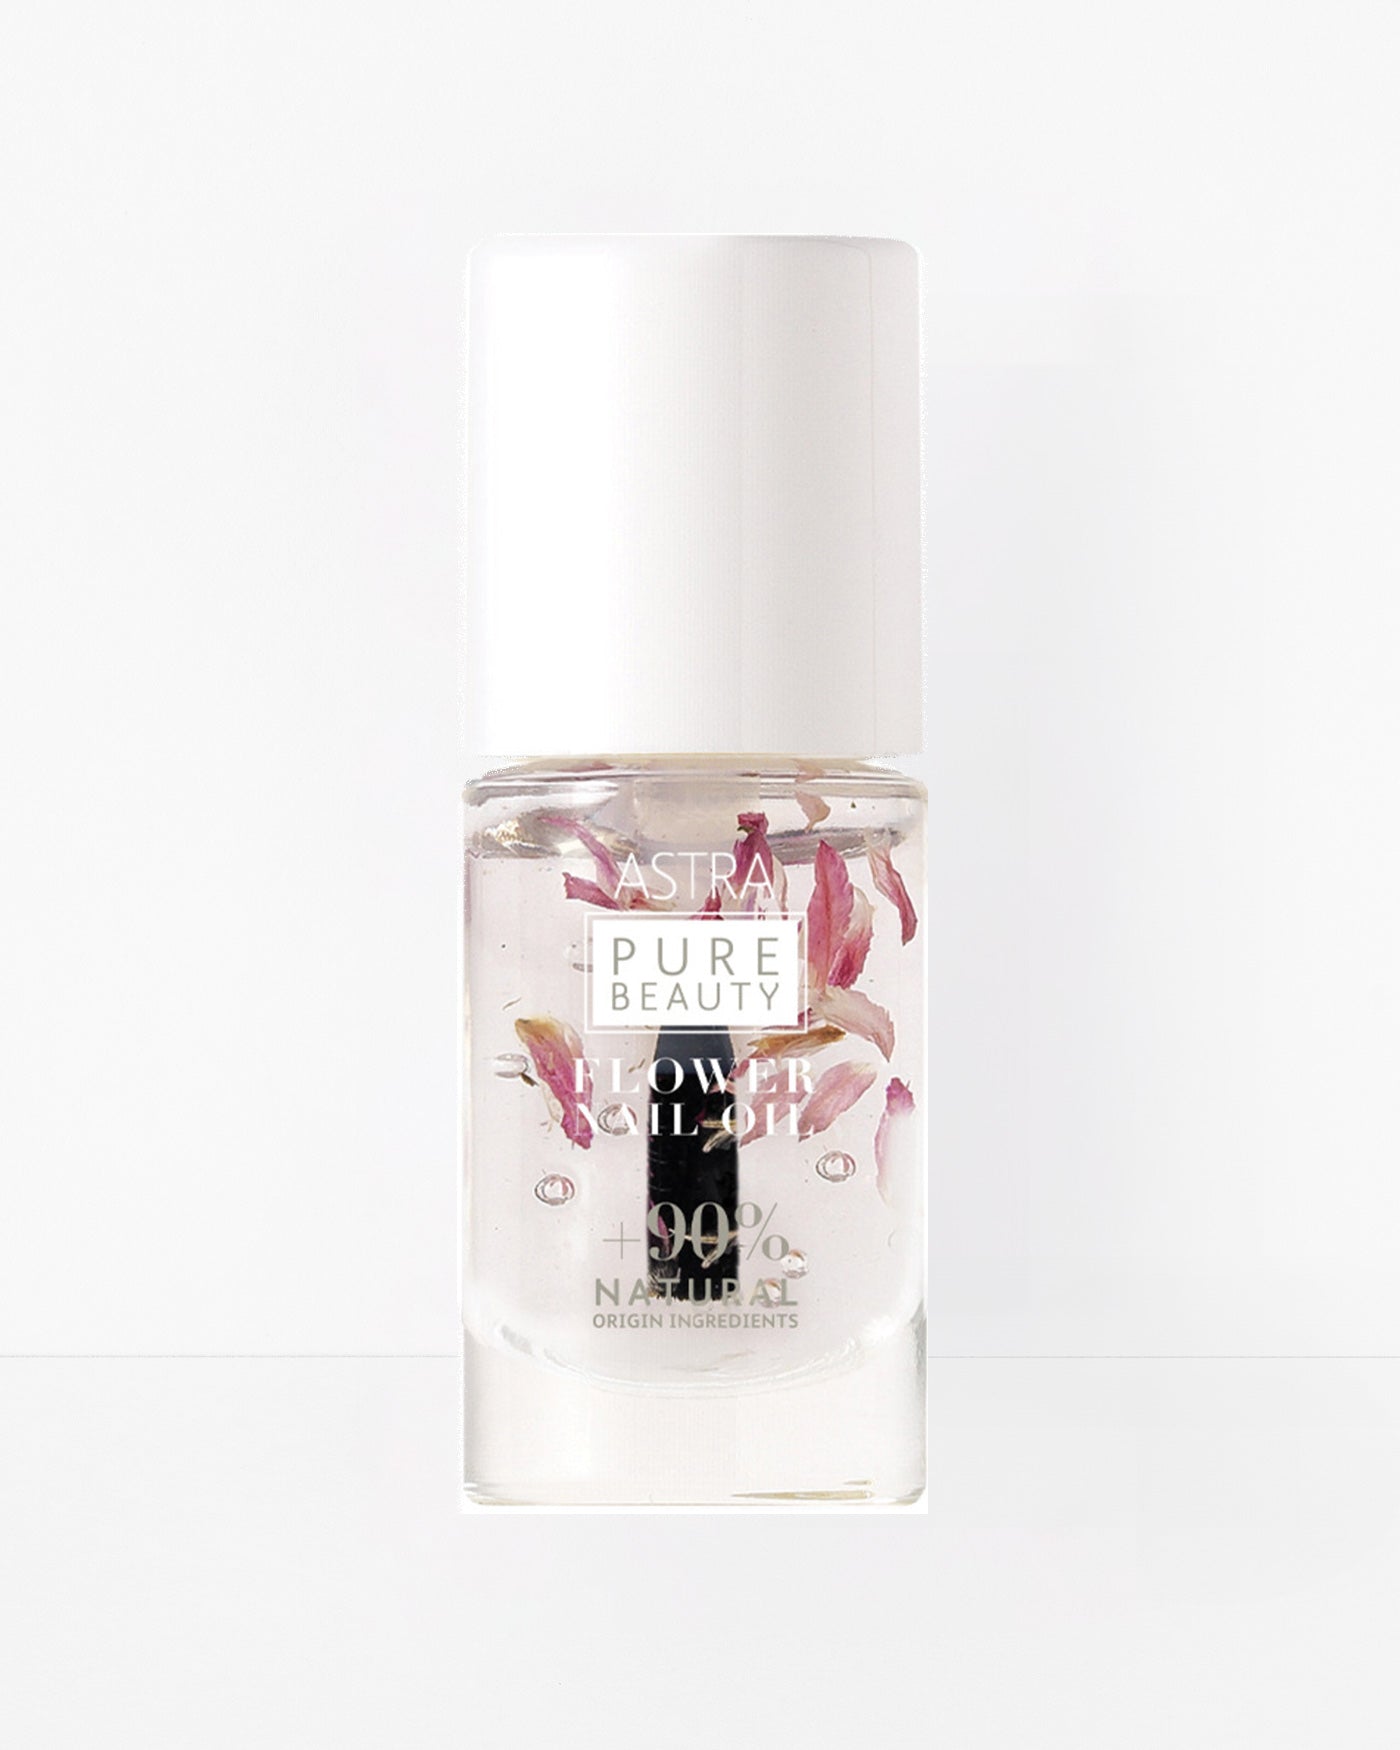 PURE BEAUTY FLOWER NAIL OIL - Olio Unghie + Cuticole - All Products - Astra Make-Up